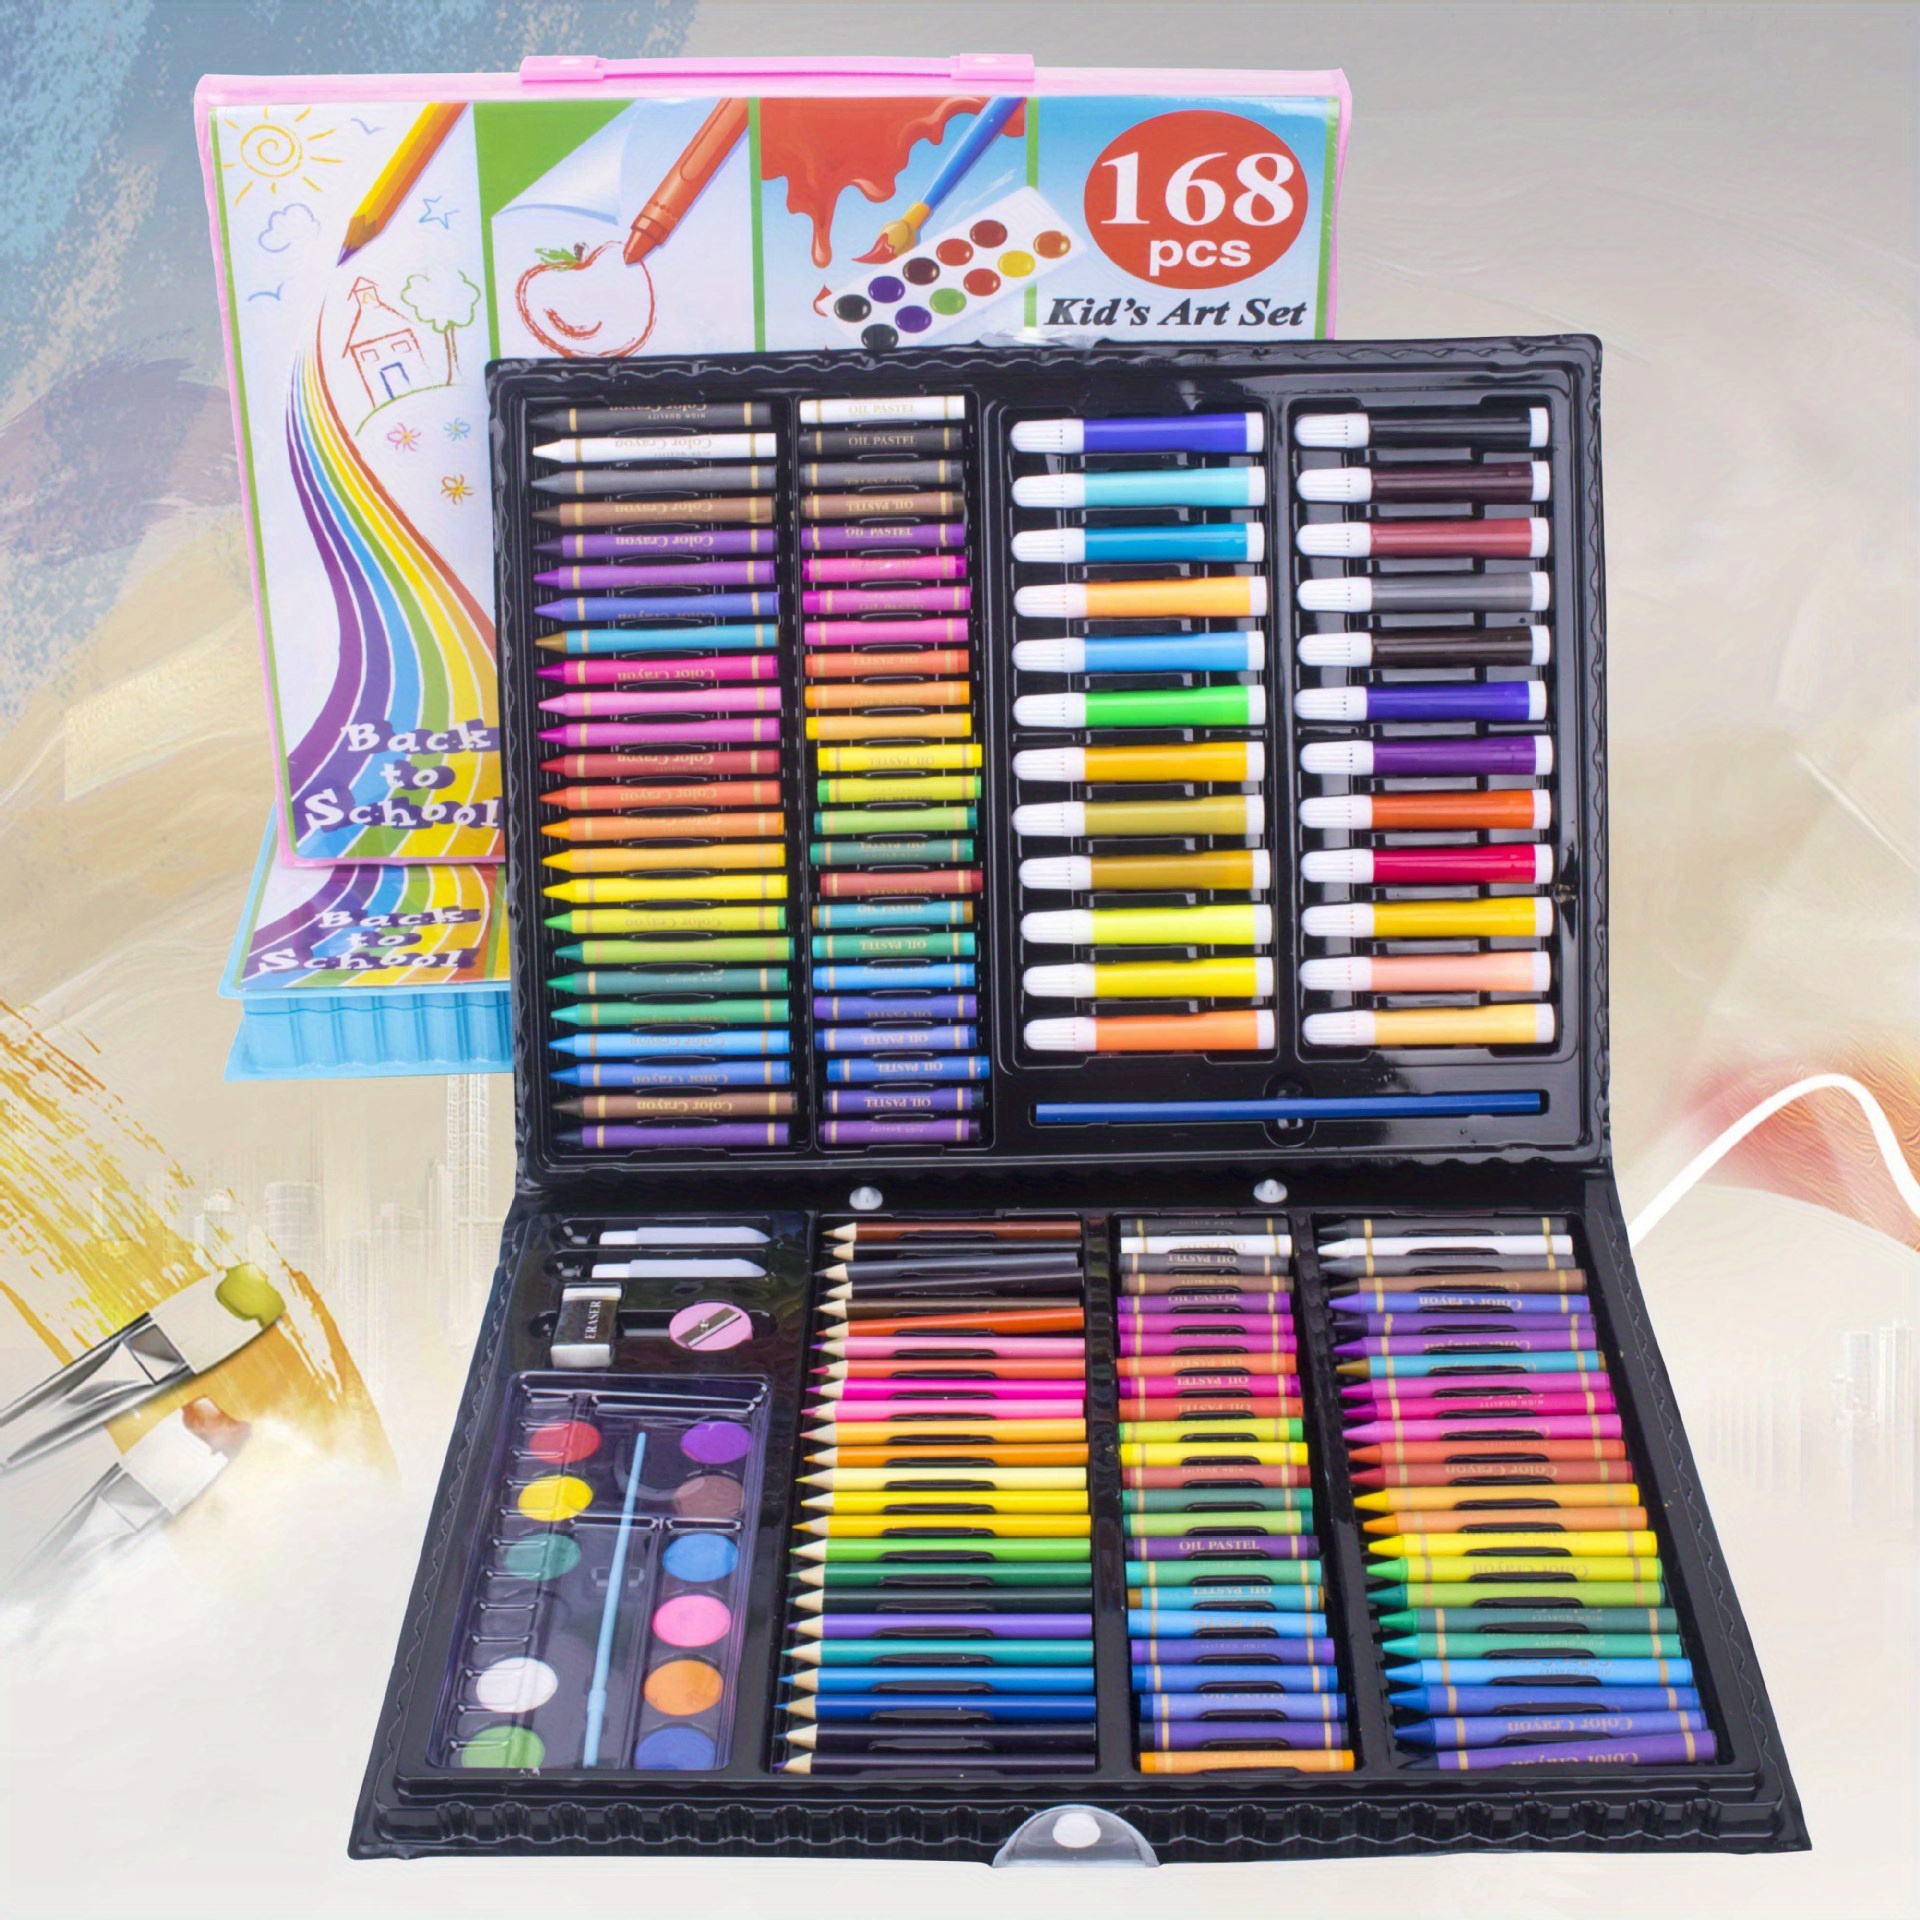 150pcs Random Painting Set With Brushes, Colored Pens, Art